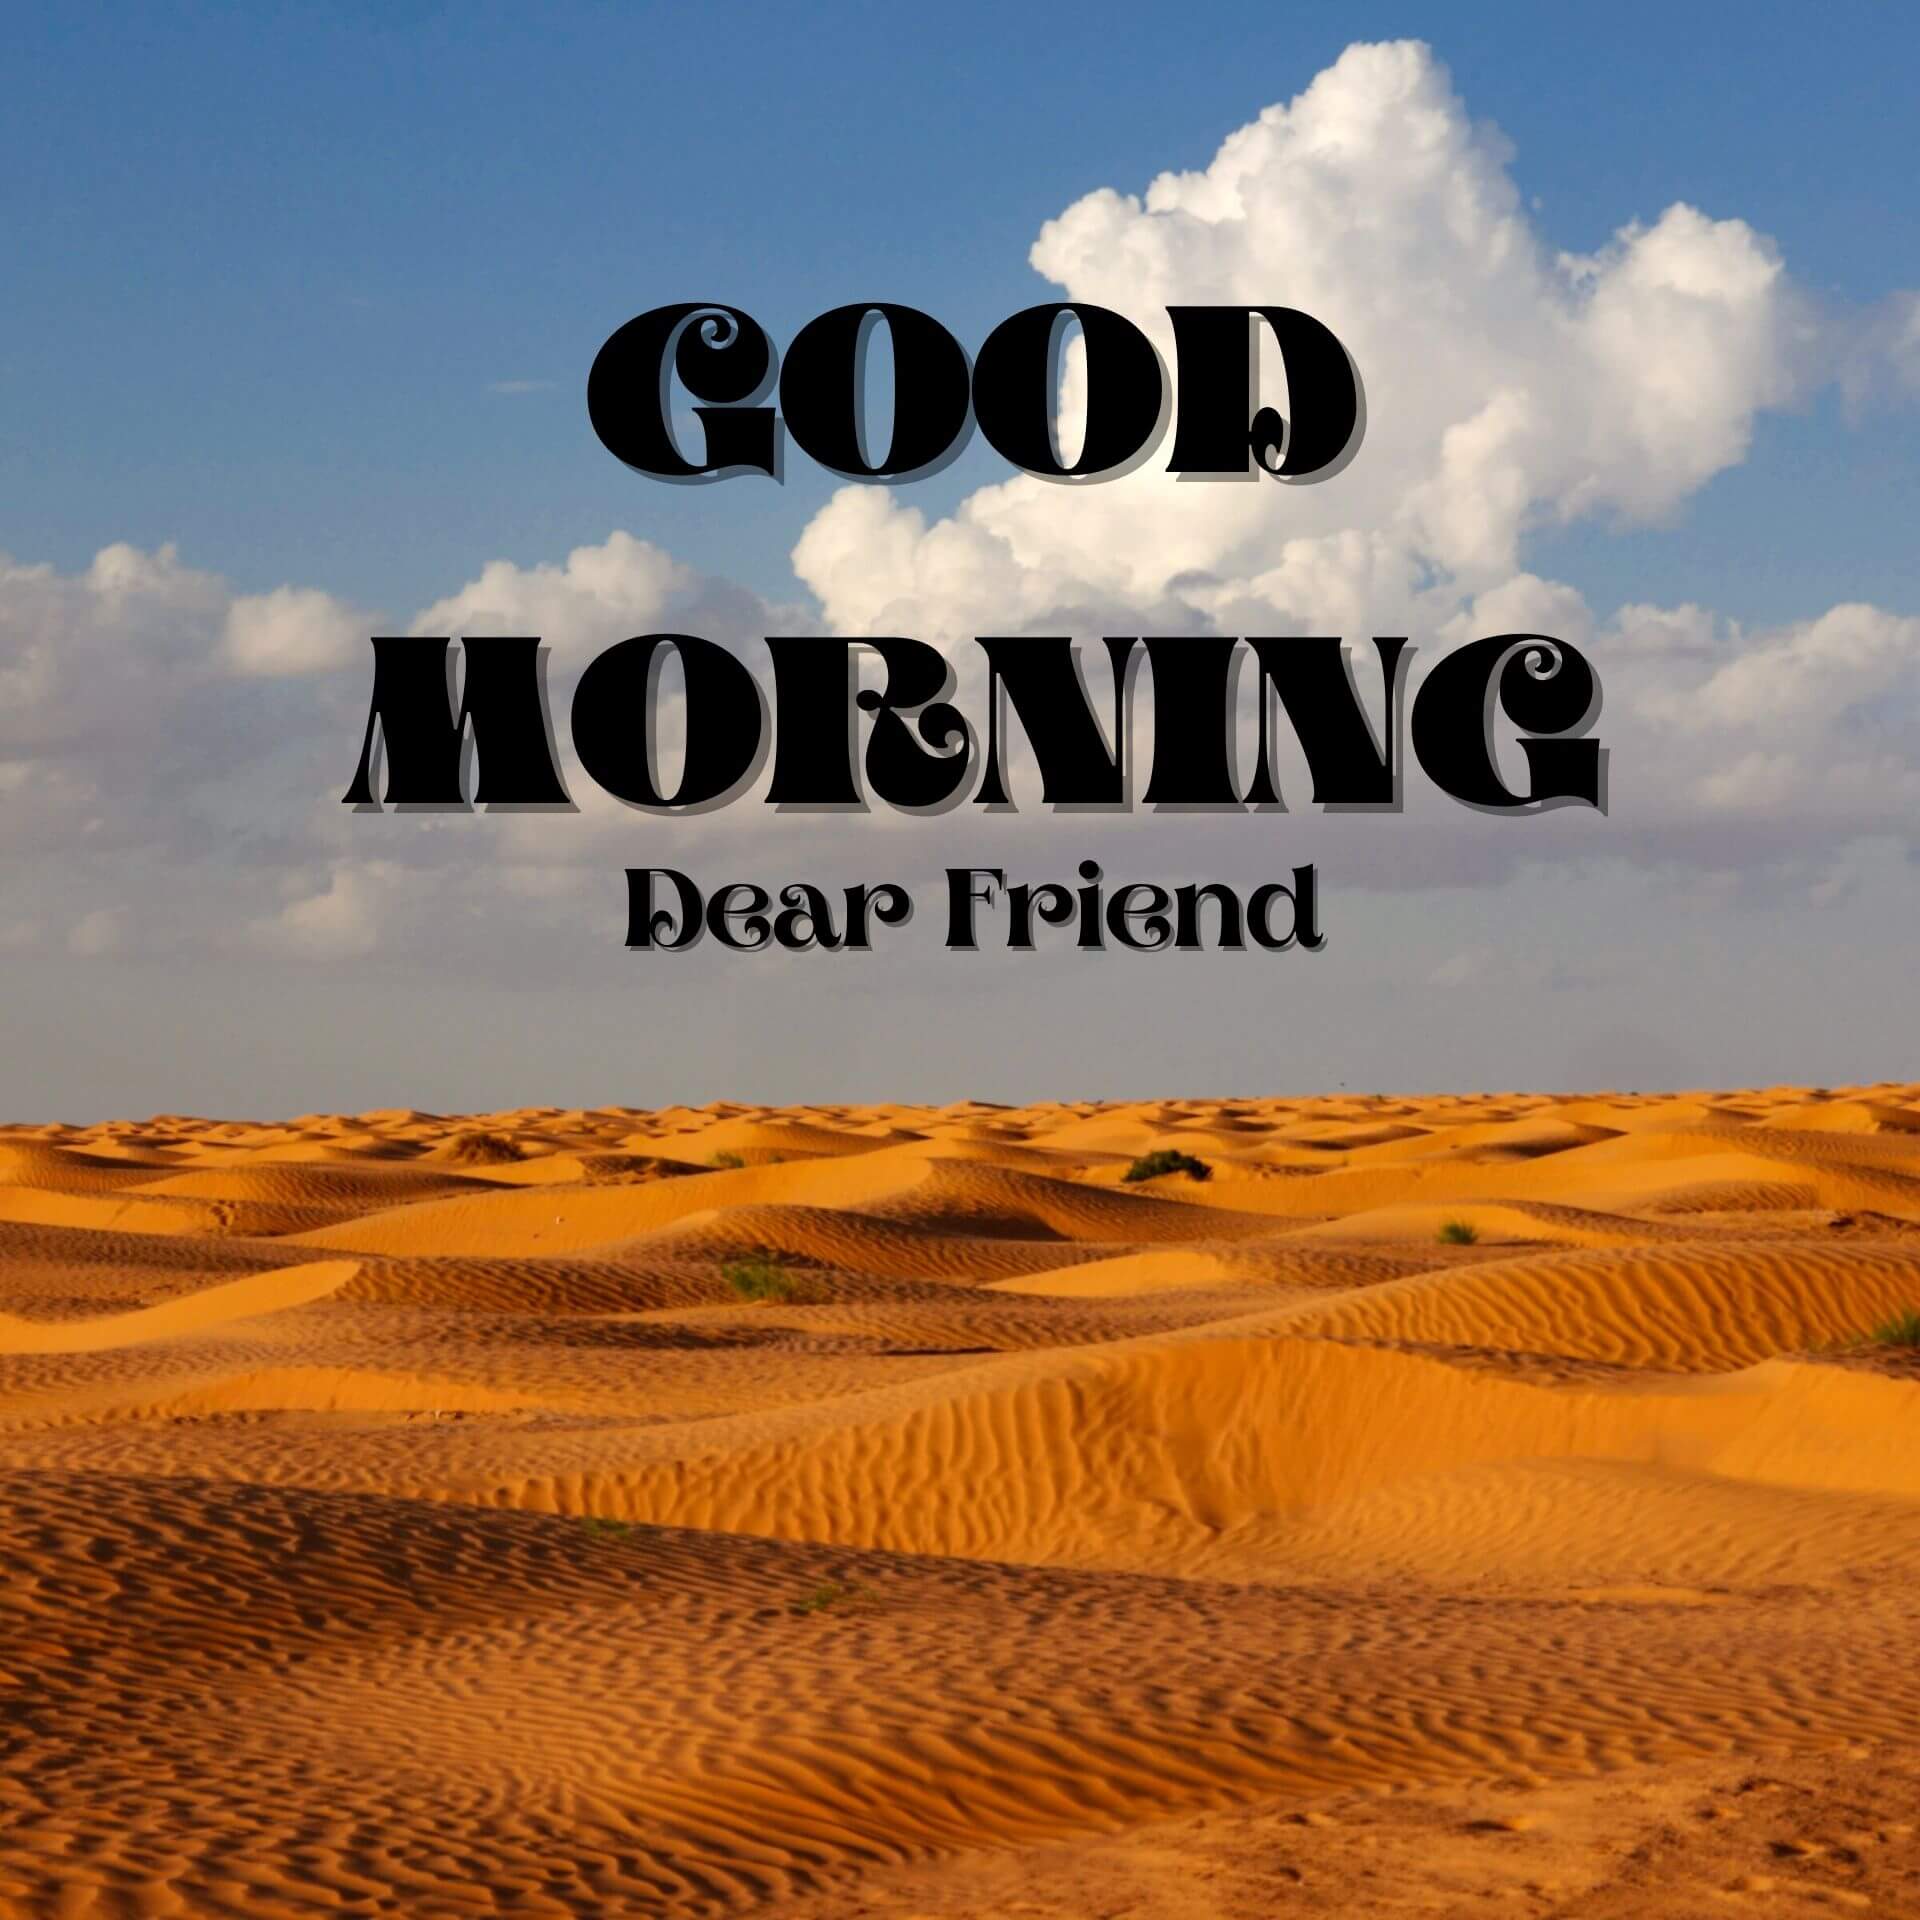 Download New Good Morning 1080p Images Download